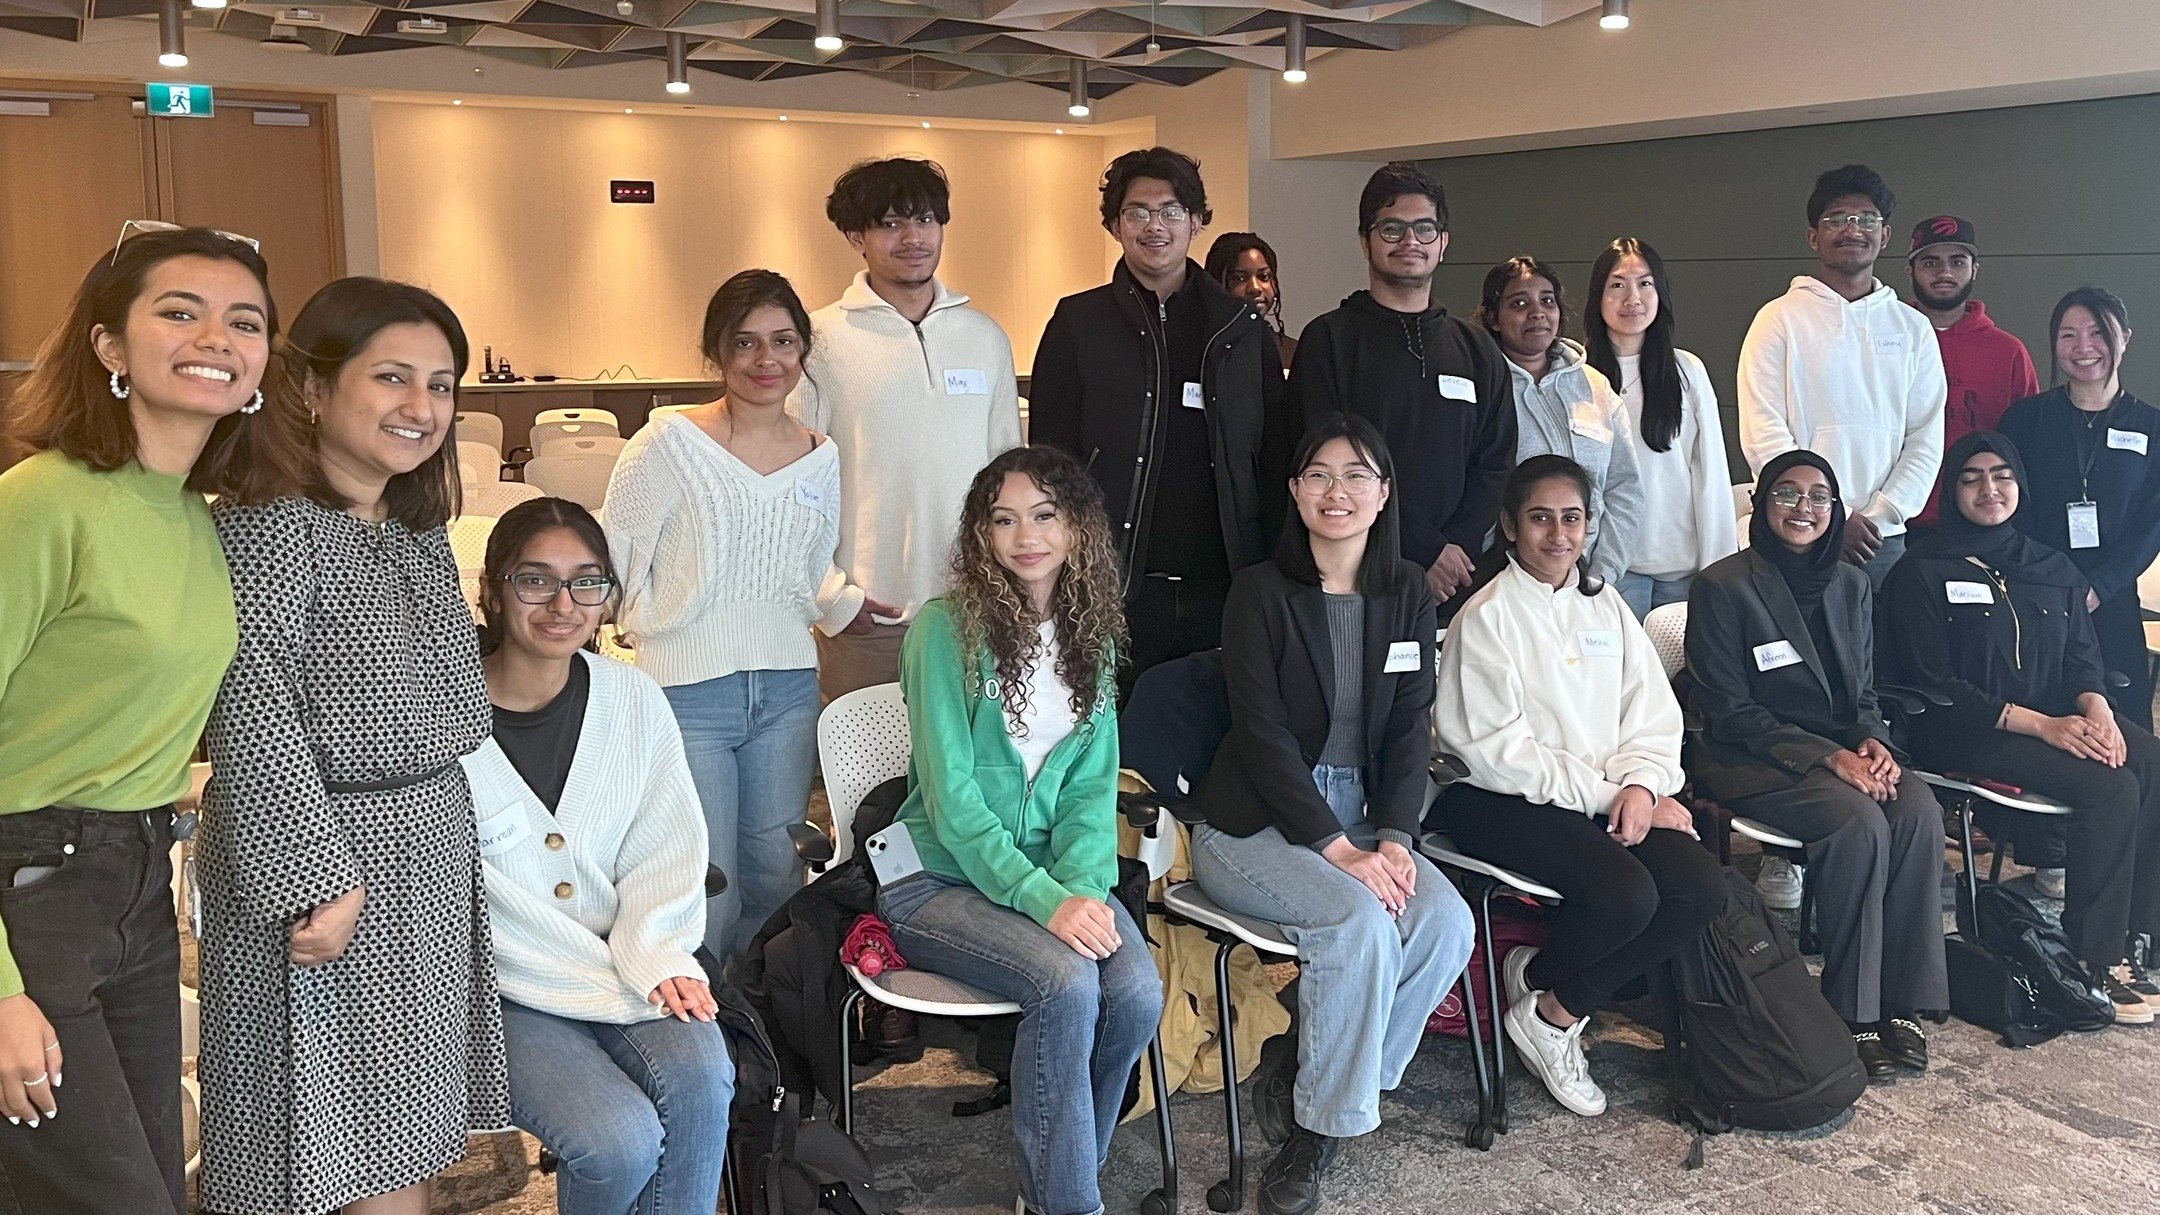 🎓 Hey High School Innovators! 🚀 Just wrapped an epic event at Microsoft. 🔥 The team shared INSANE insights into the future of tech and business and even dished on the MUST-HAVE soft skills! Psst...like communication, resilience and adaptability! ?